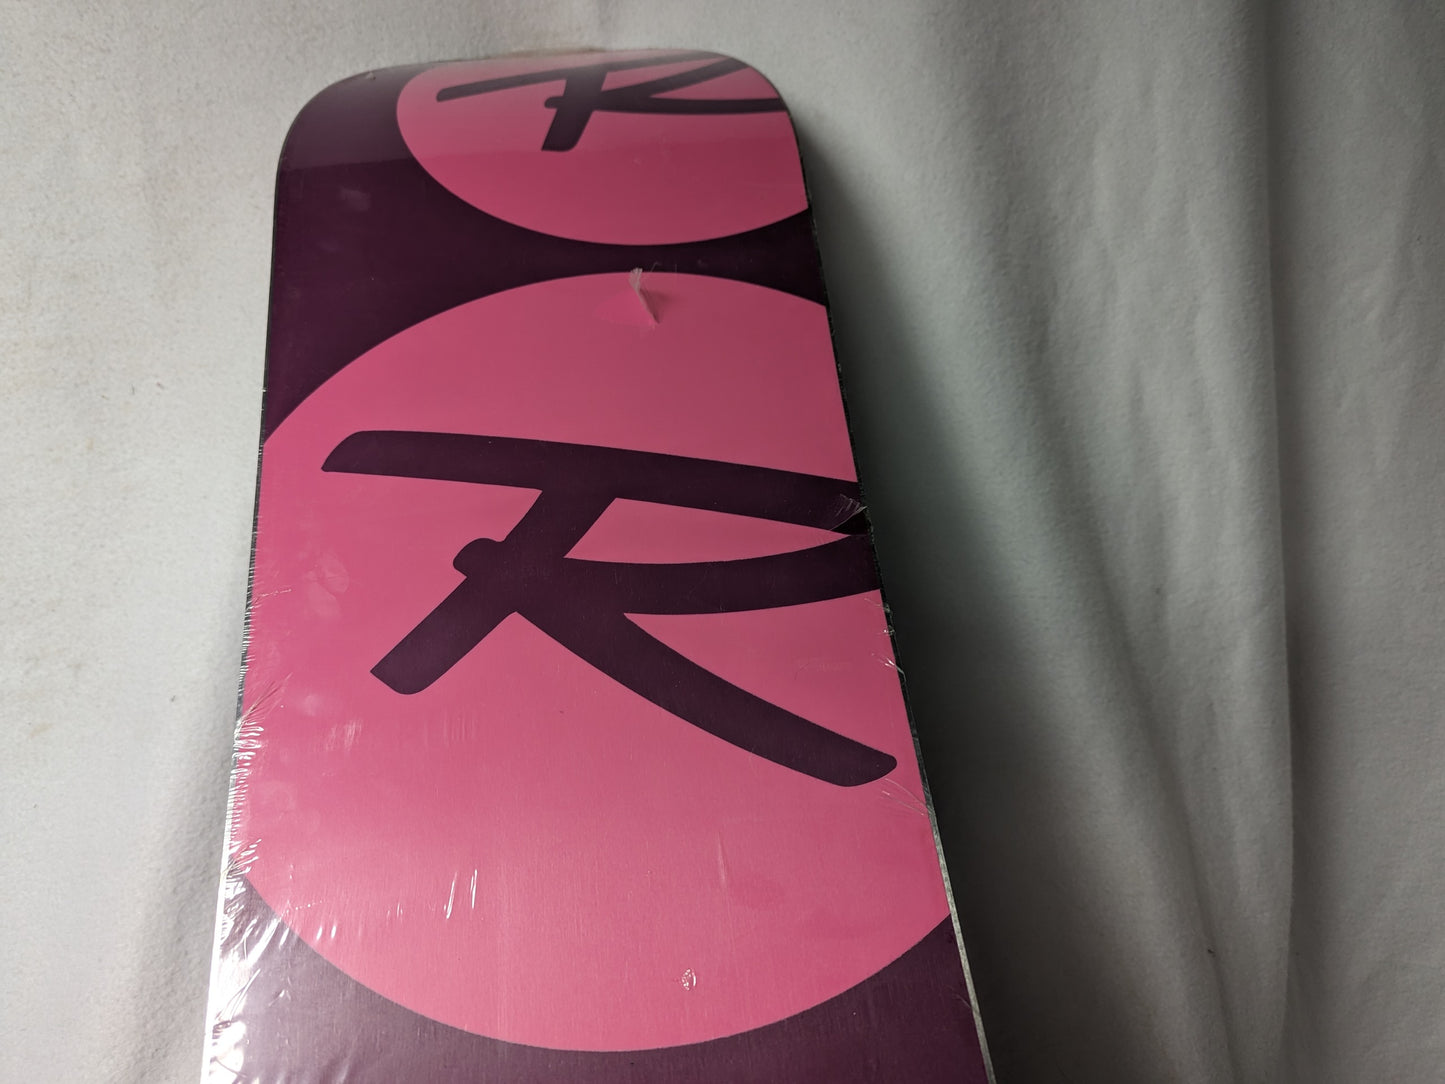 Rossignol Tesla Ampte Snowboard  *Deck Only*No Bindings* Size 139 Cm Color Purple Condition New with Tags